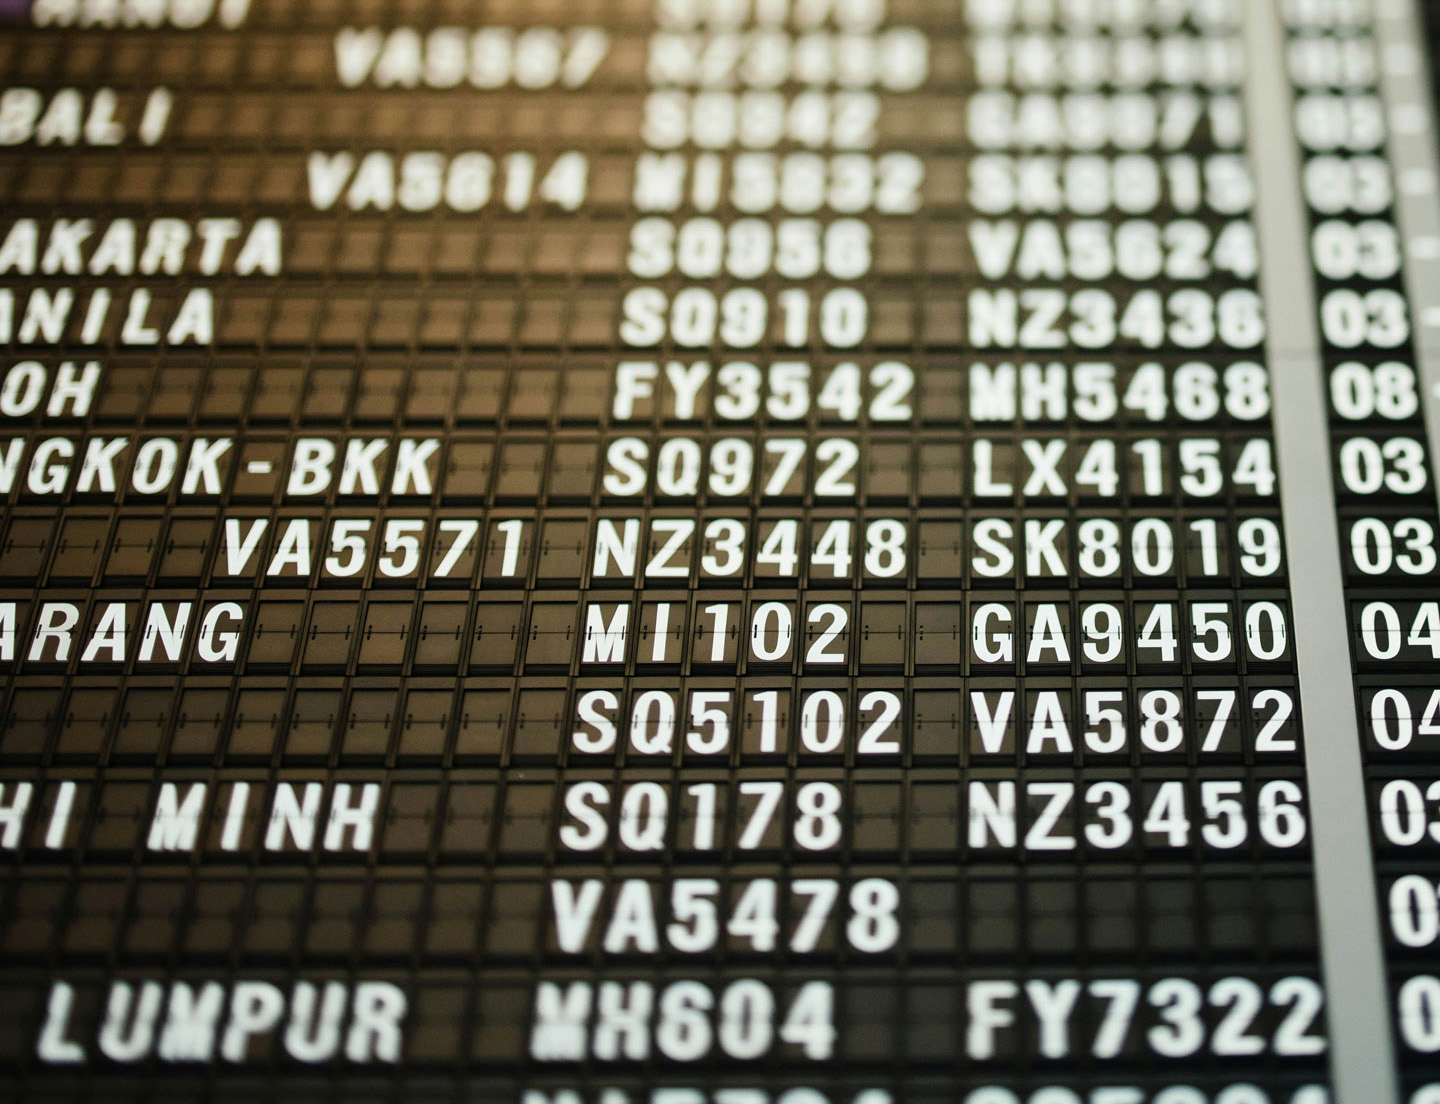 An airport departure board, close up showing rows and rows of flight numbers